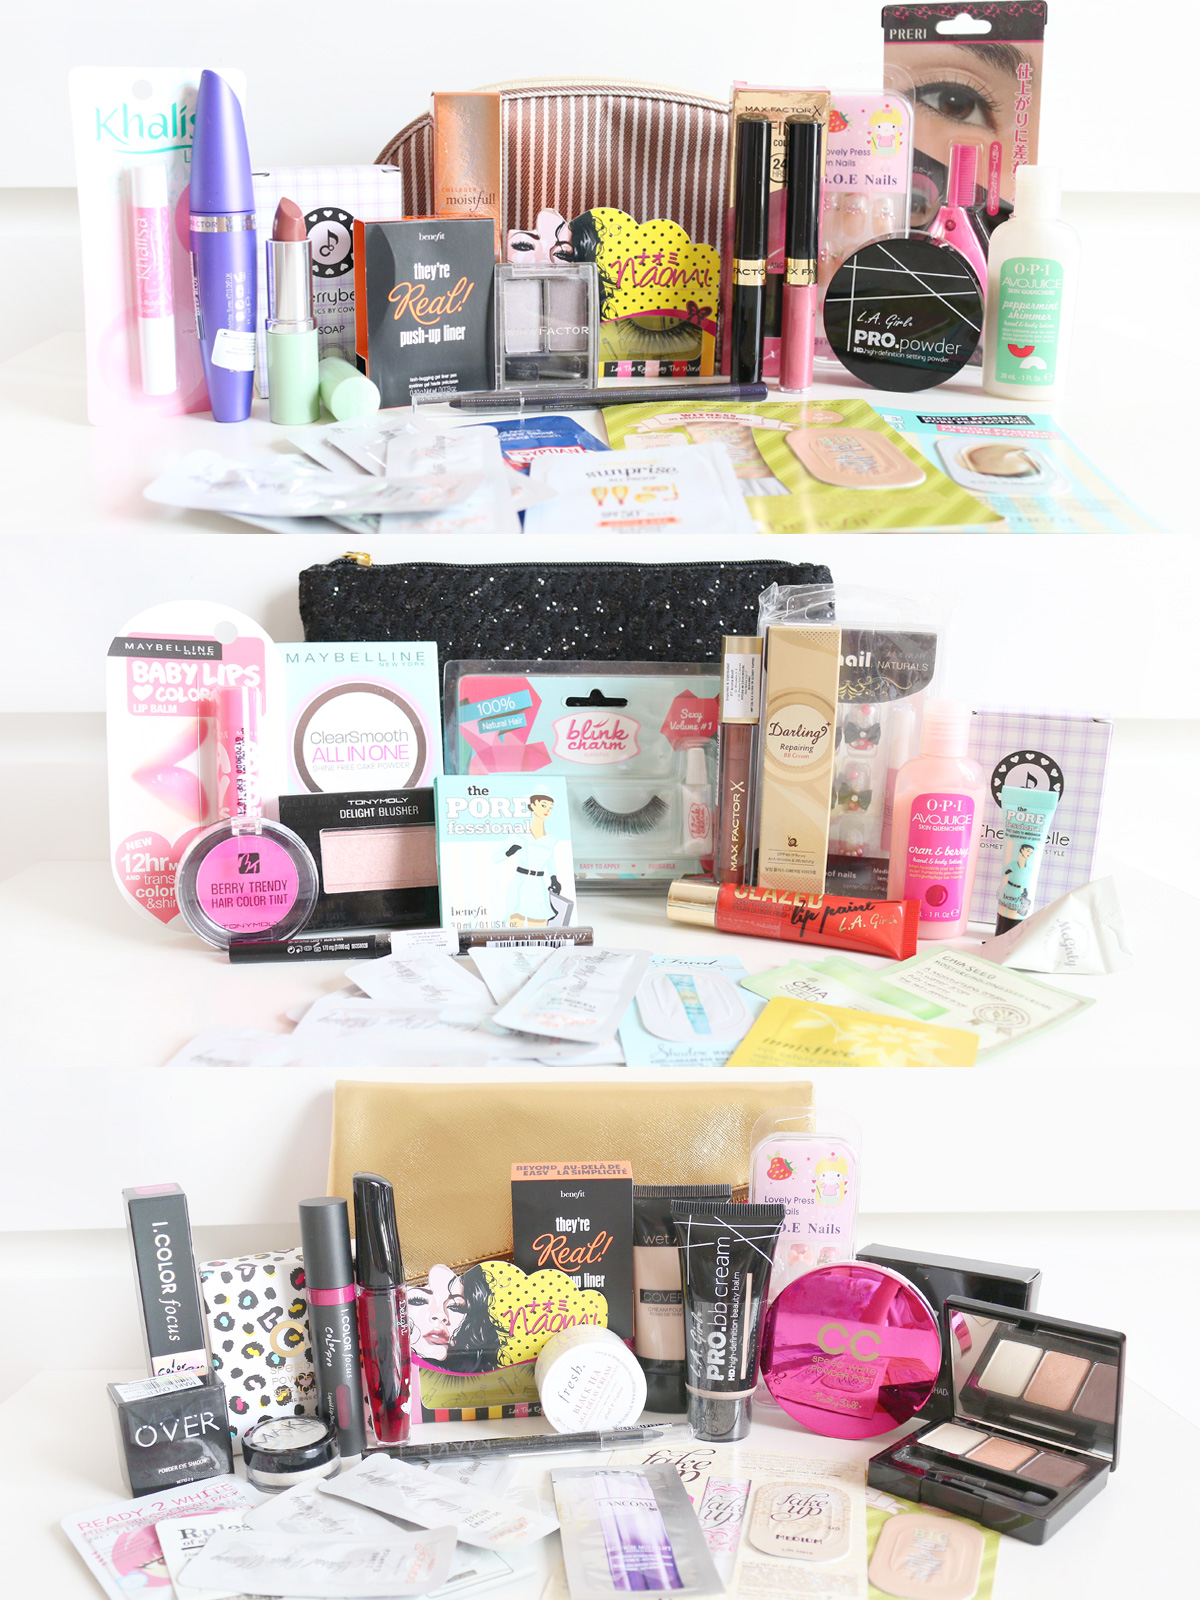 jean milka, beauty blog, giveaway, indonesia, makeup, give away, benefit, lancome, etude house, make over, la girl, cathy doll, tony moly, max factor, clinique, maybelline,